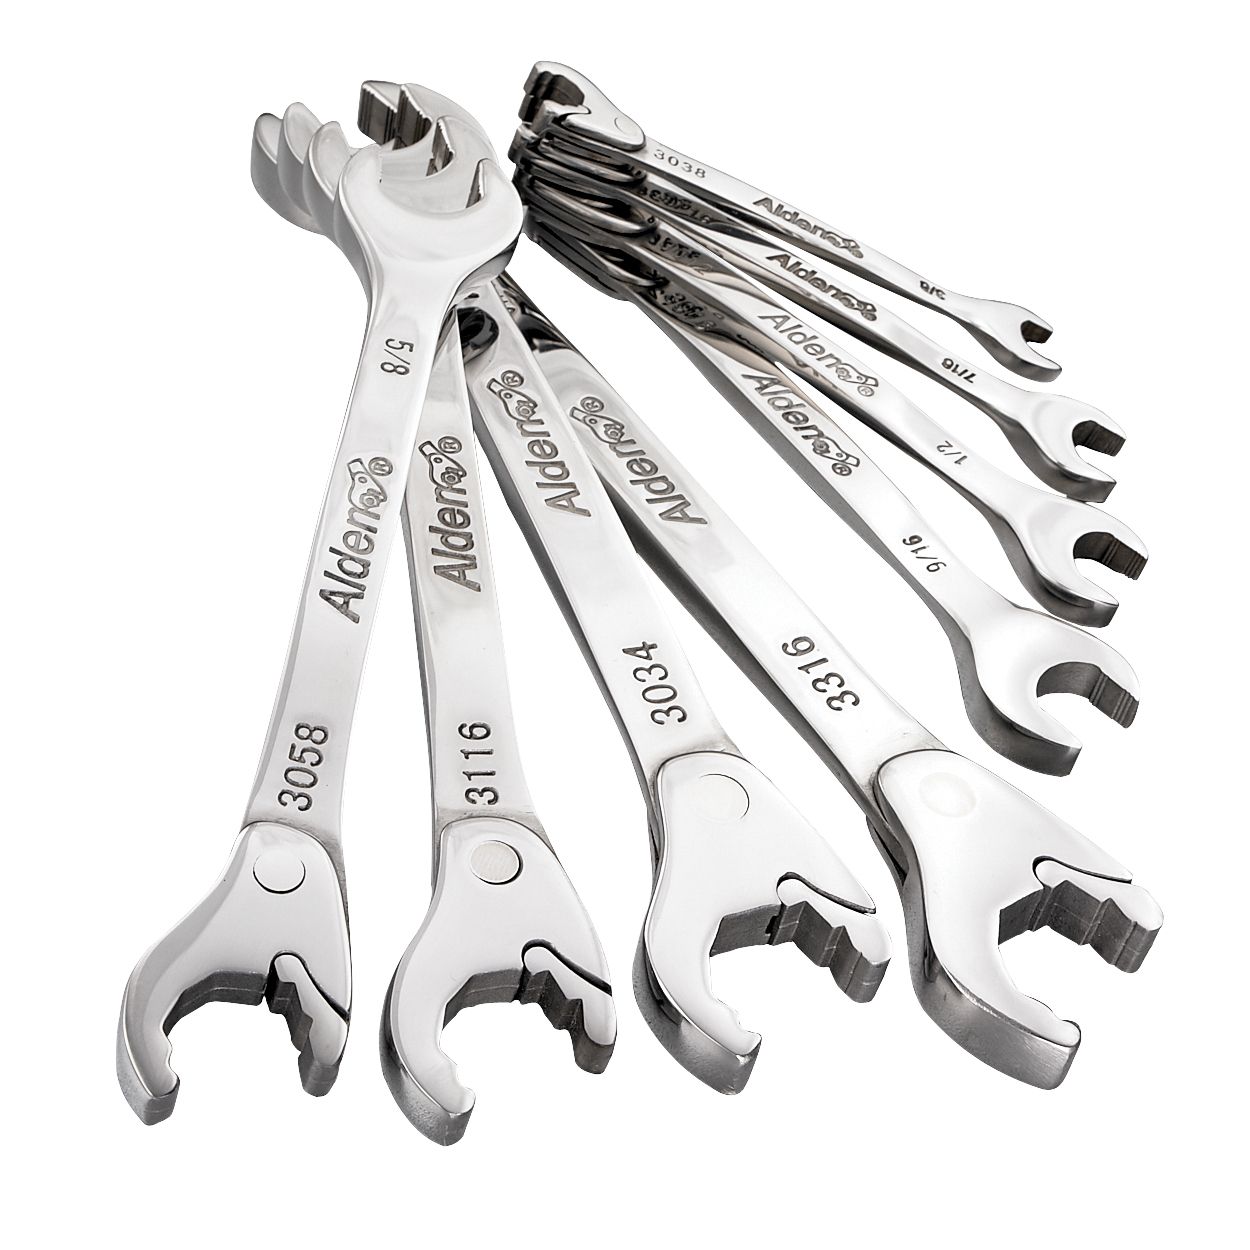 Chicago Brand 8 pc. Open-End Ratchet Wrench Set - SAE